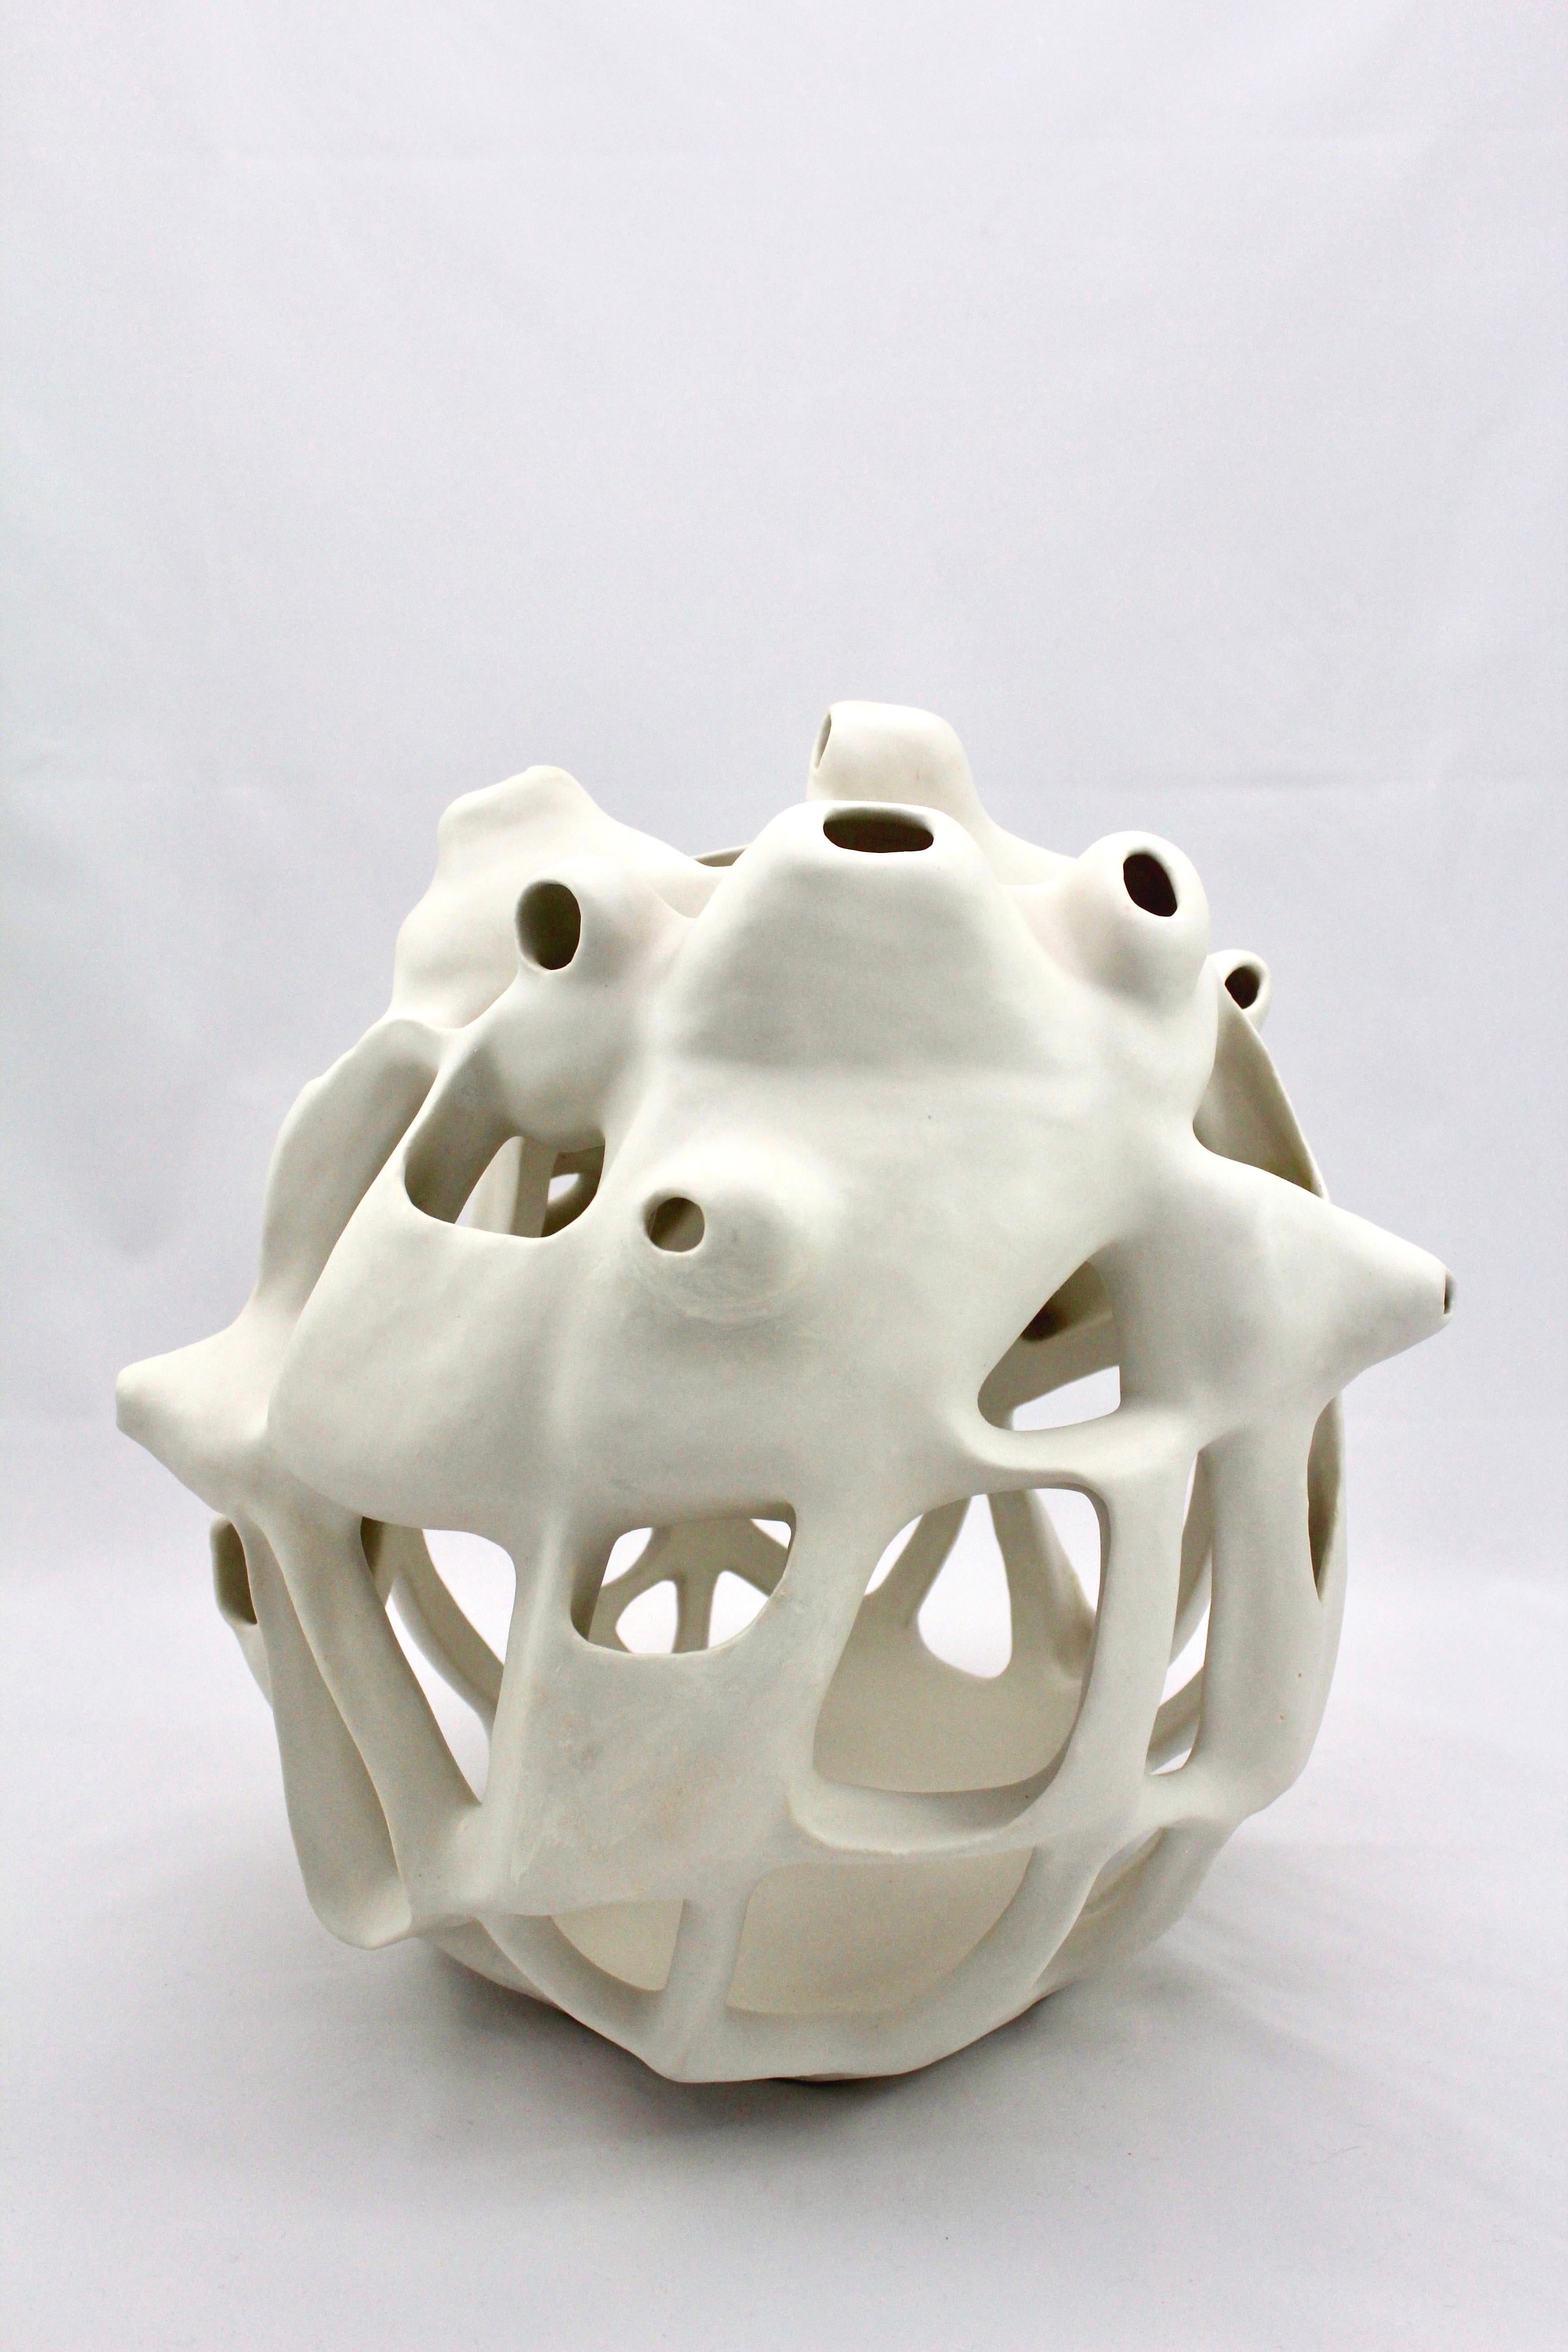 Untitled #2 - abstract geometric, organic white glazed porcelain sculpture 